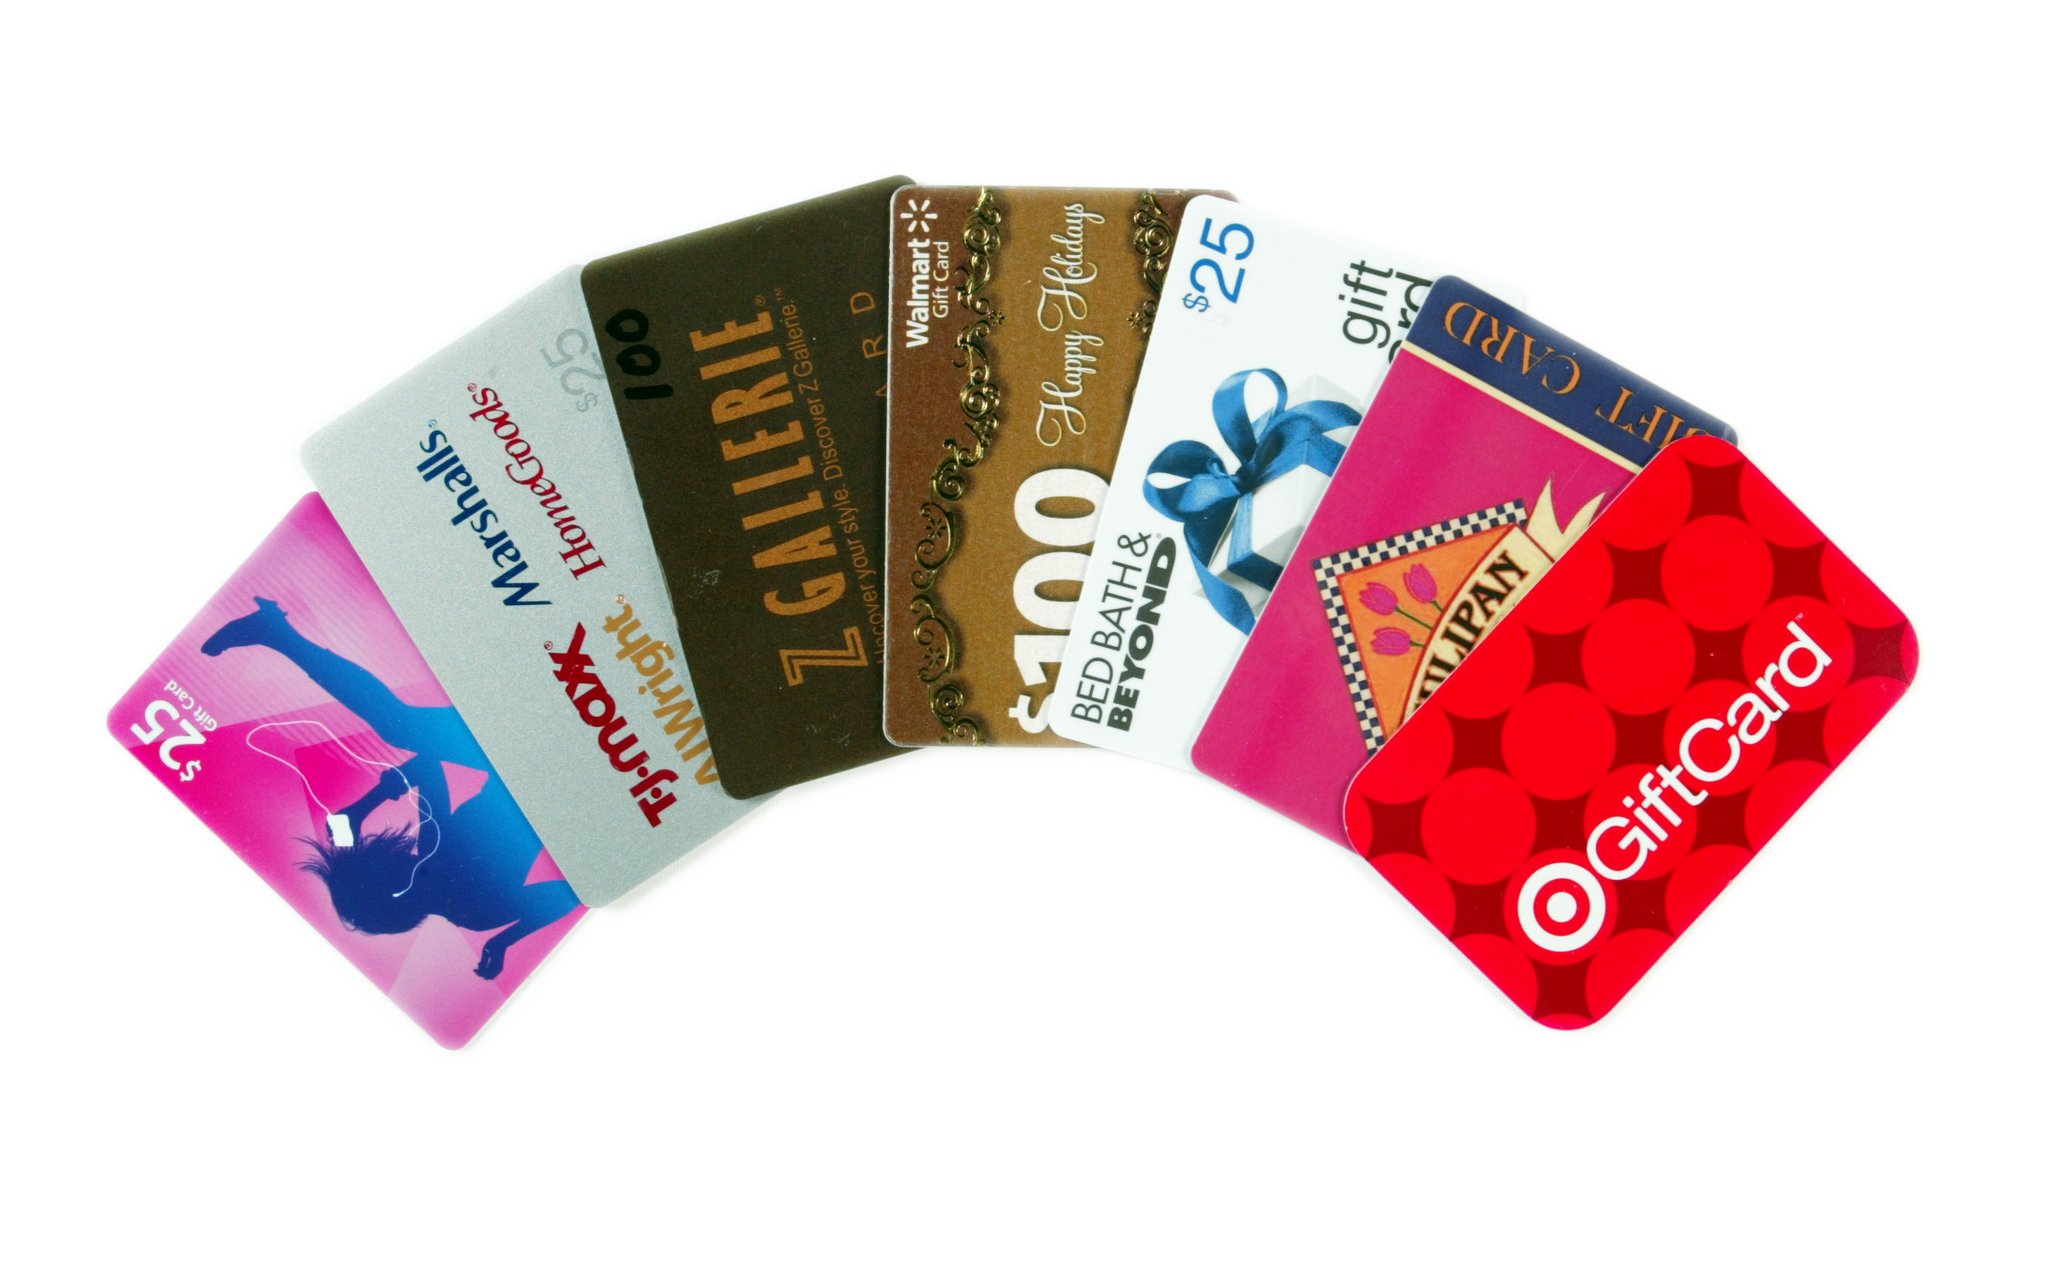 Gift Cards for business - Incentive and Motivation - Home of Employee enagagement, rewards and benefits